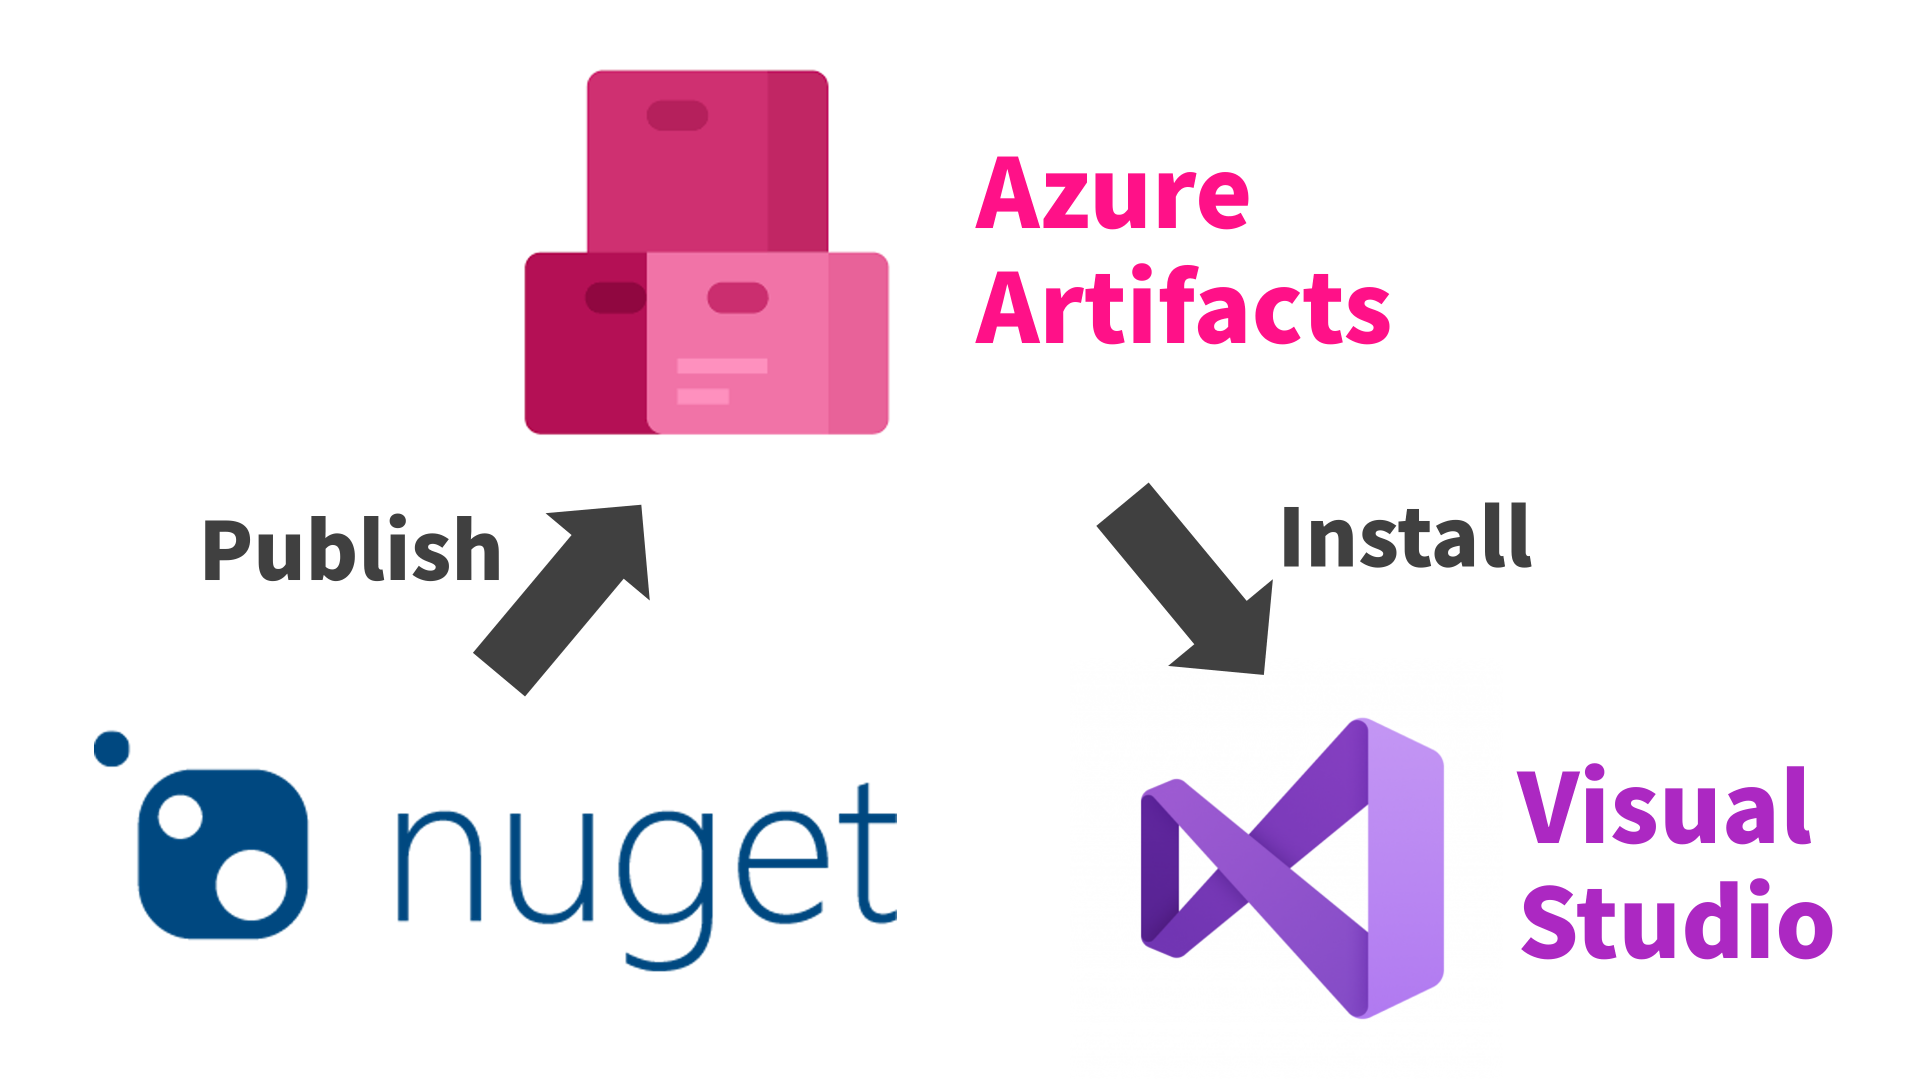 azblob://2022/11/11/eyecatch/2020-02-19-getting-started-azure-artifacts-000-e1582095314790.png